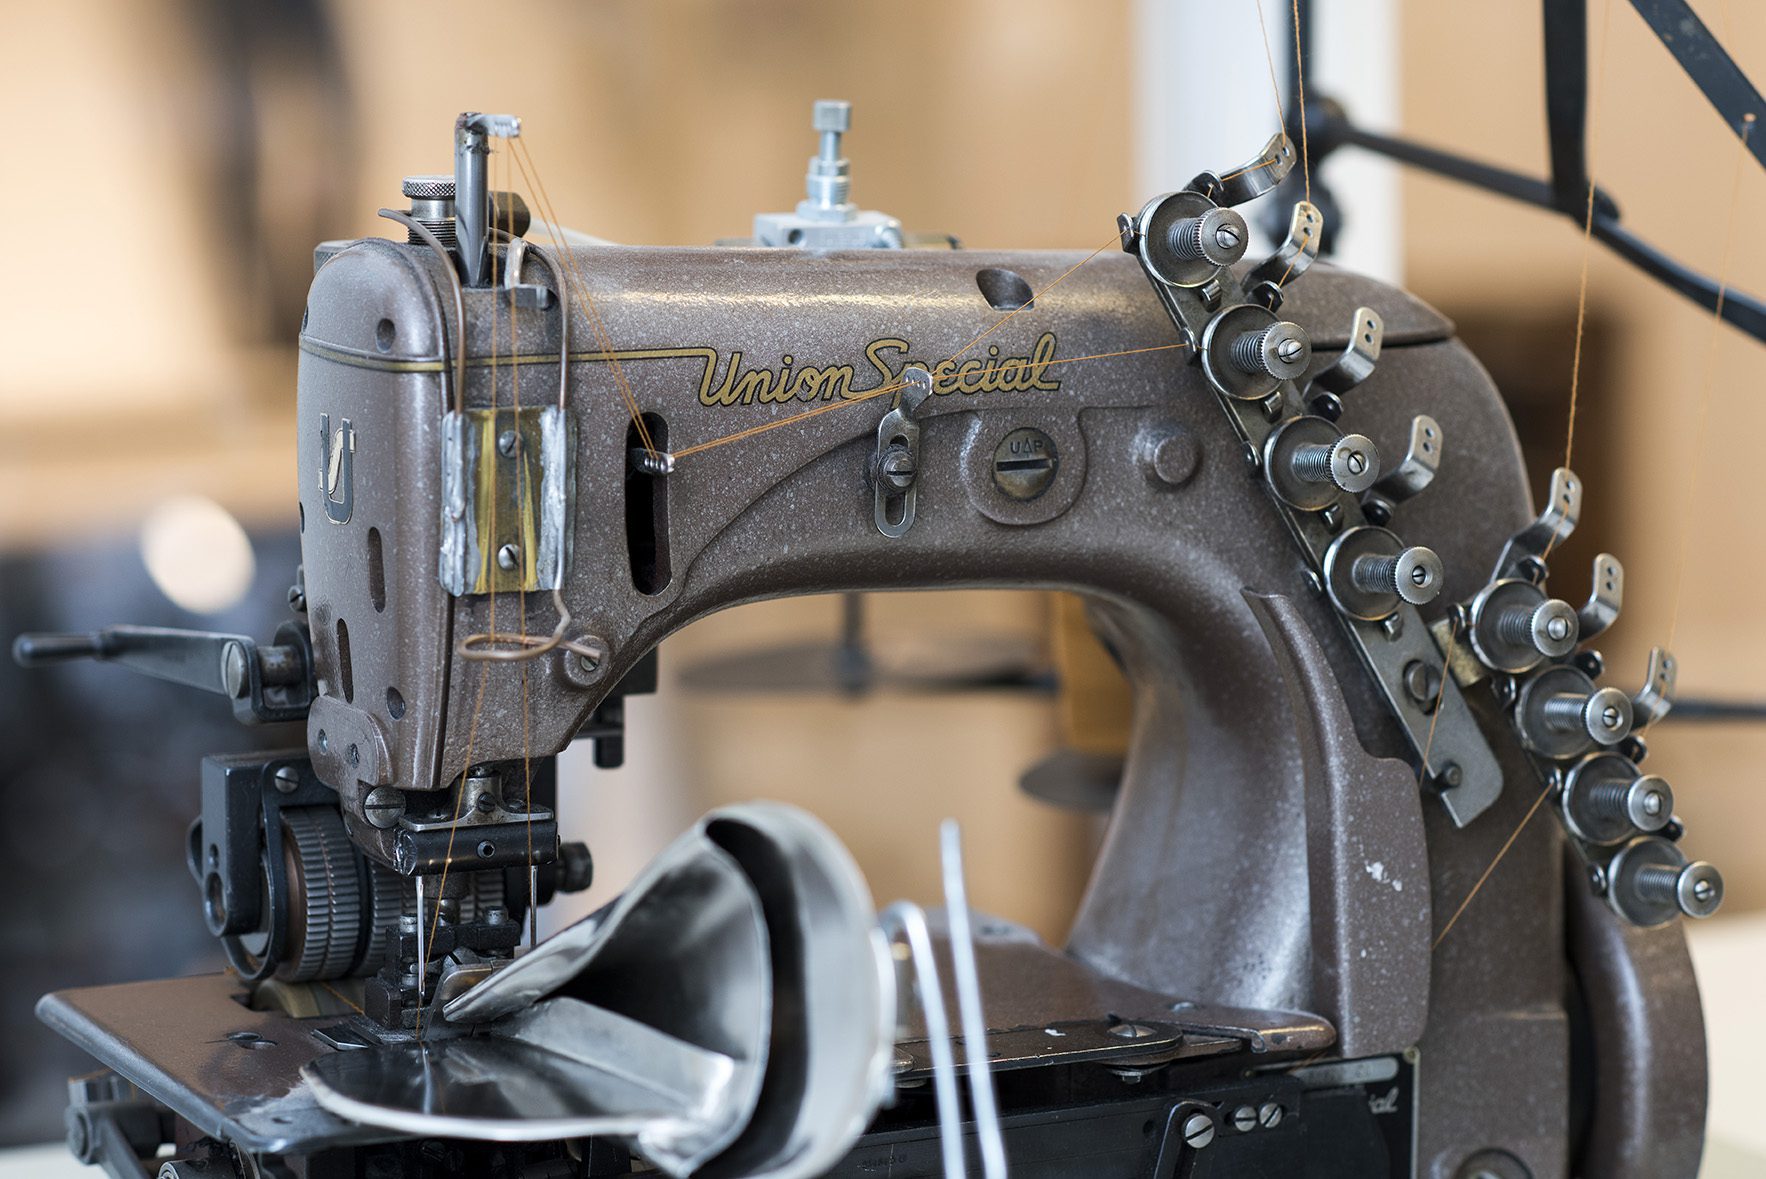 Nifty Jeans Union Special sewing machine